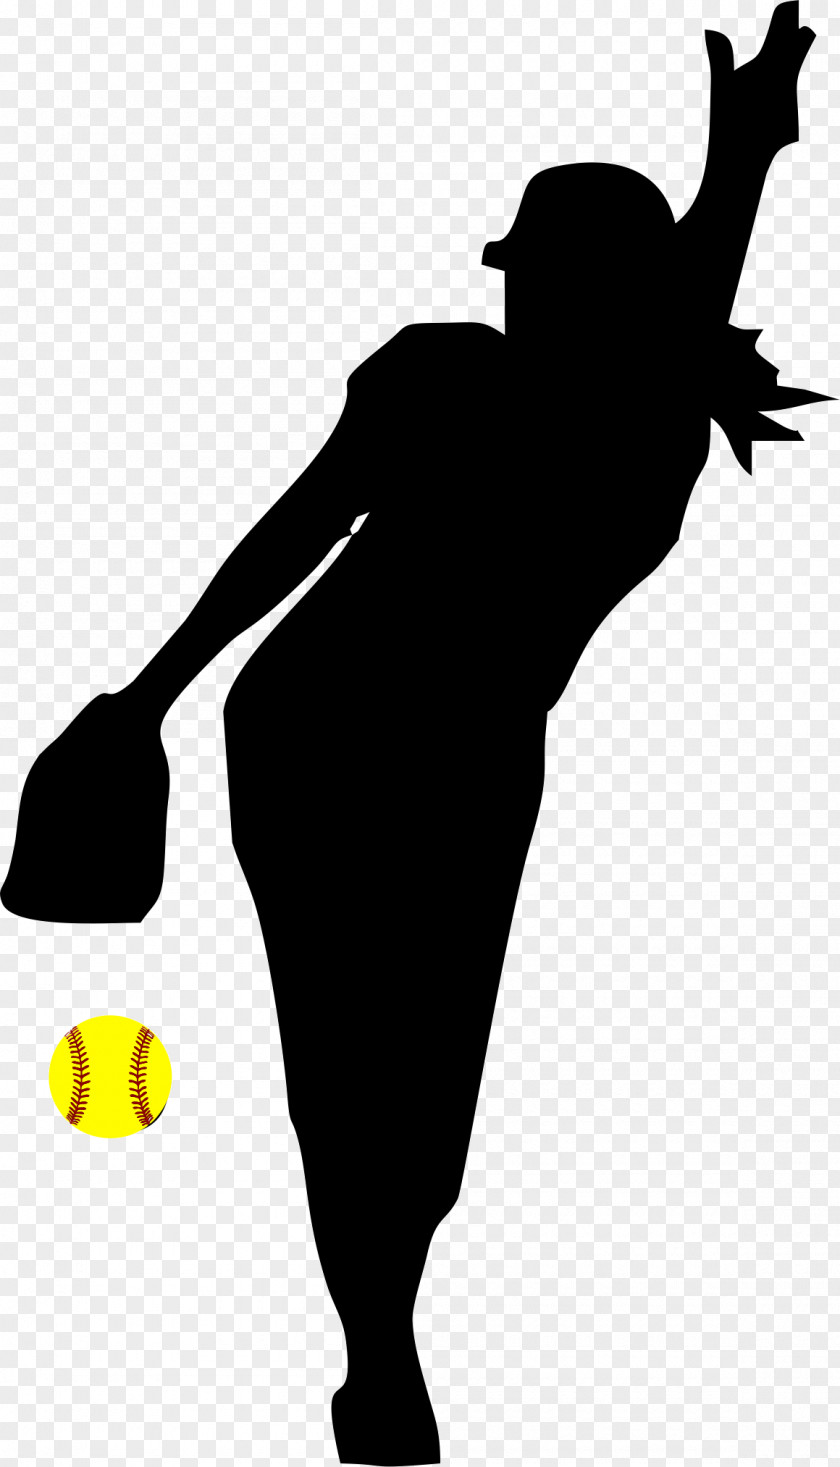 Badminton Players Silhouette Softball: Pitching Fastpitch Softball Clip Art PNG